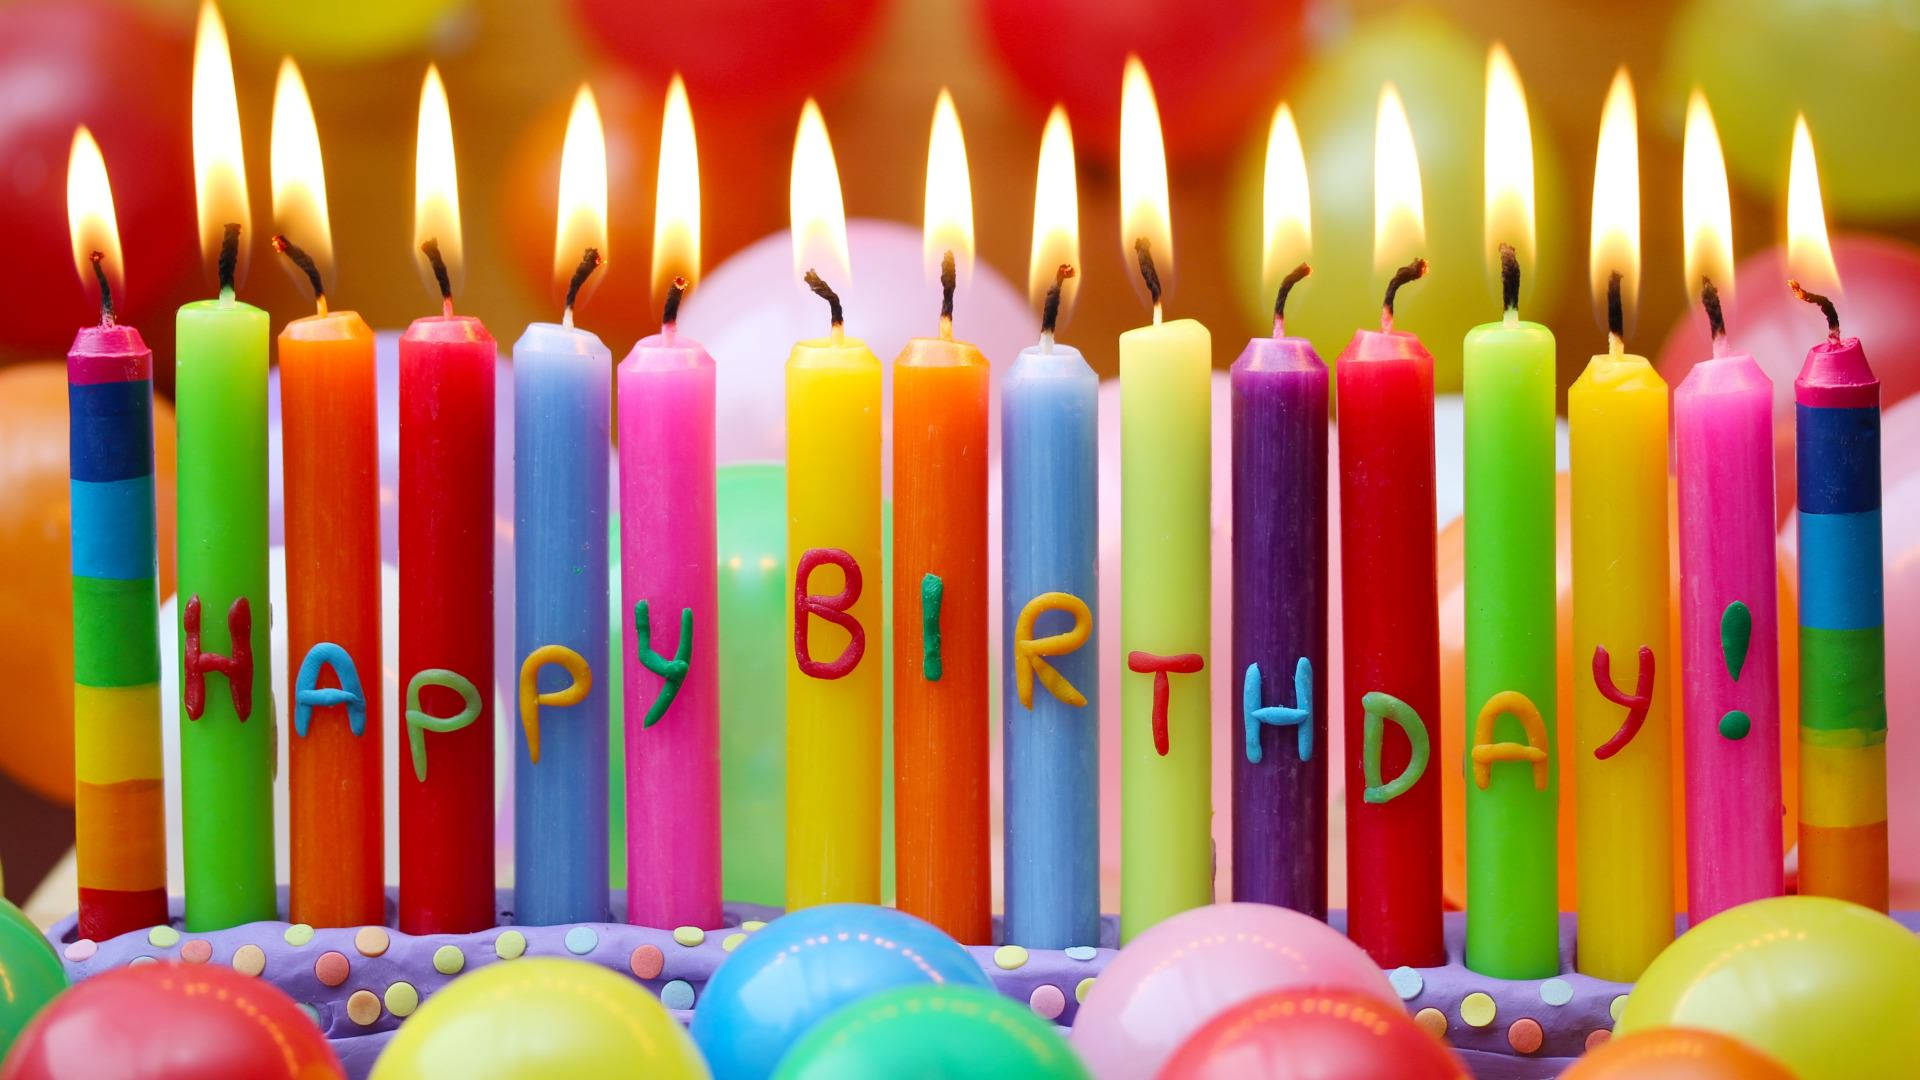 It's My Birthday Colorful Candles Wallpaper